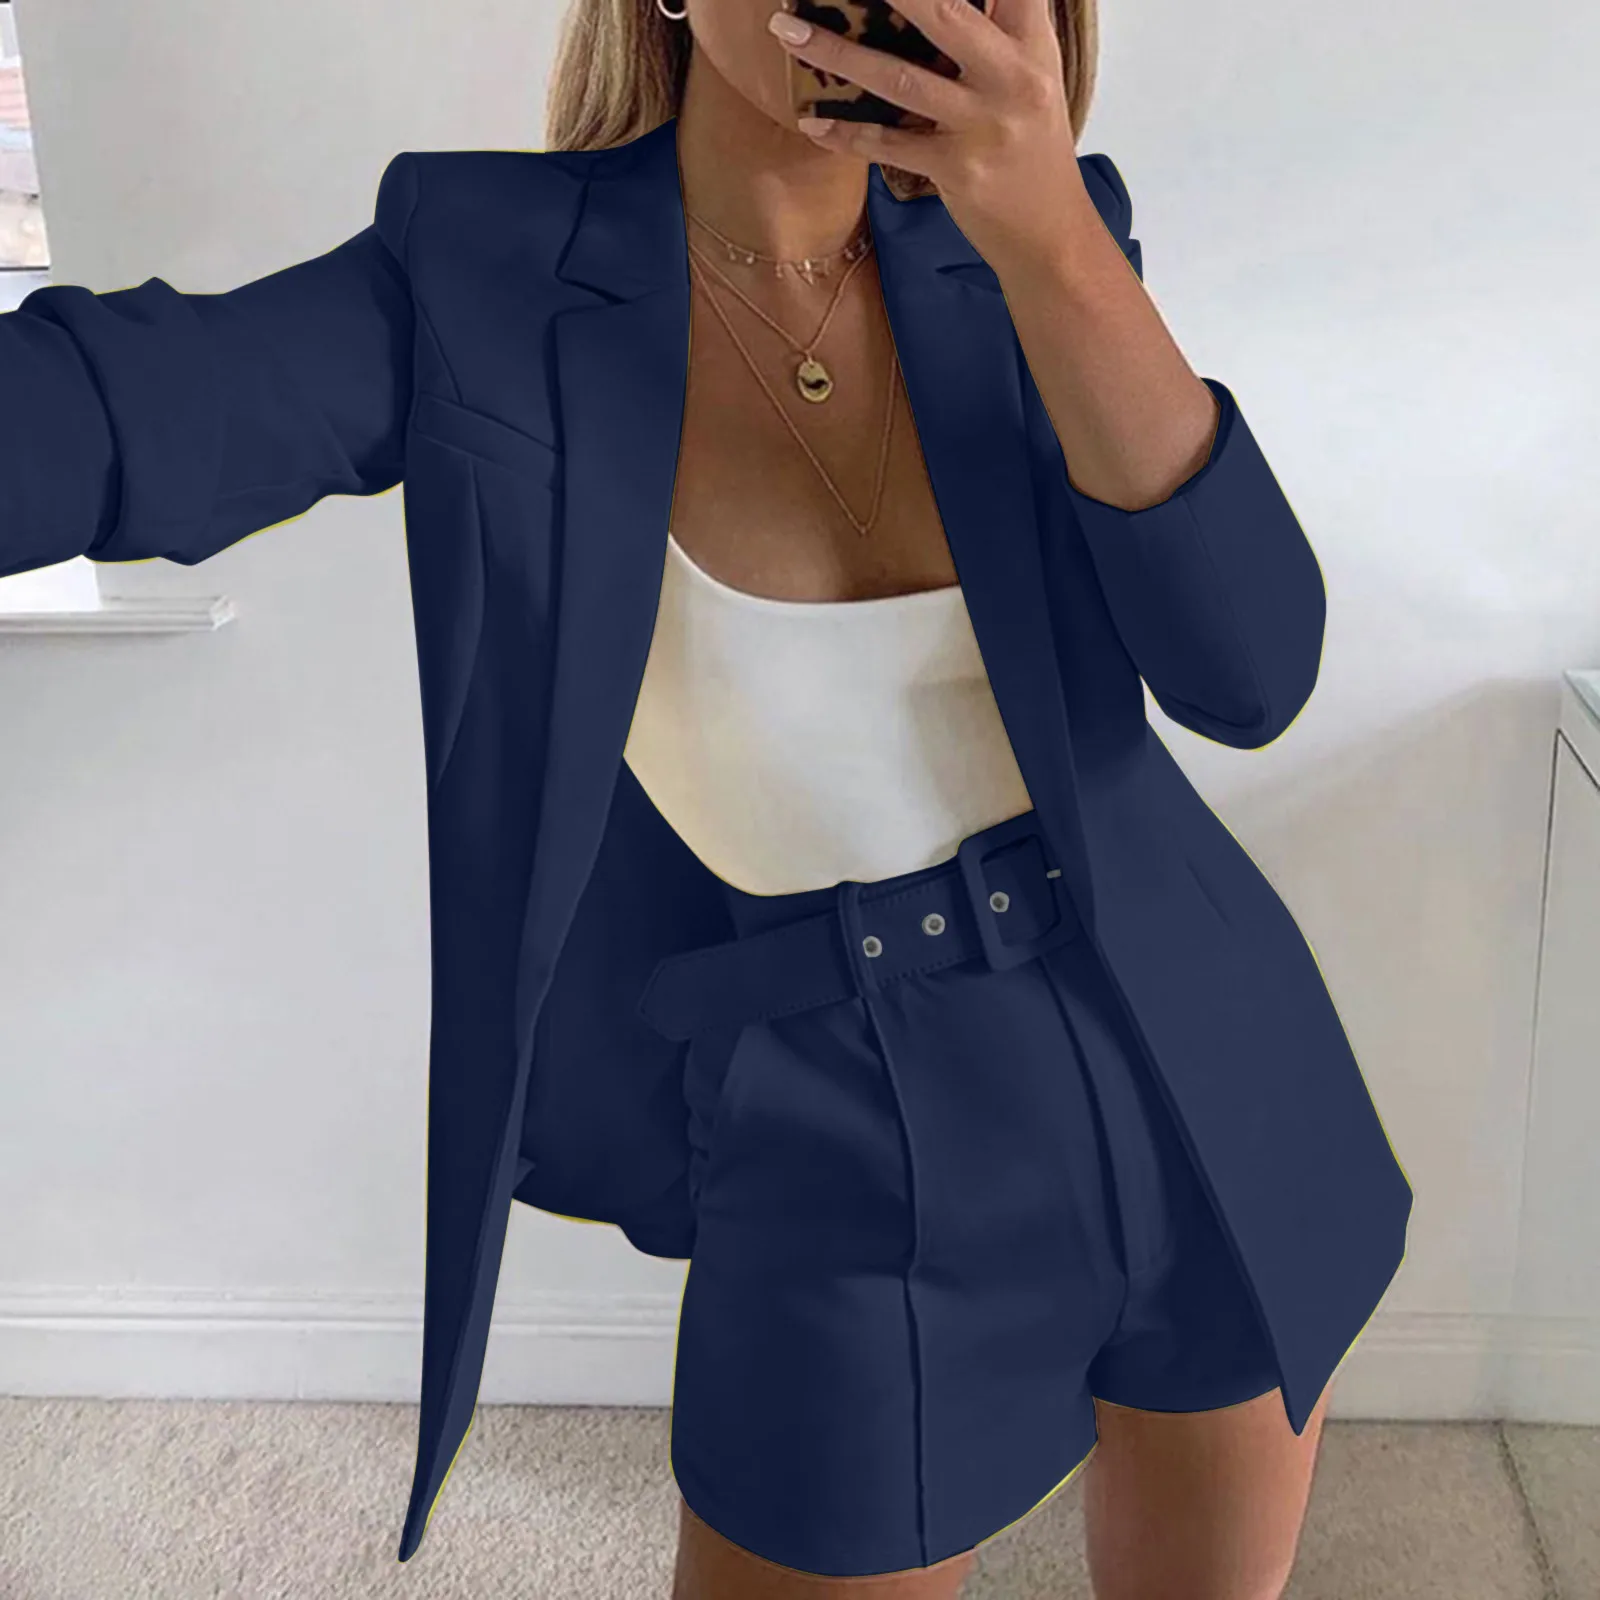 South Butt Jacket Women's Casual Light Weight Thin Jacket Slim Coat Long Sleeve Blazer Office Pant Suits for Women Dressy